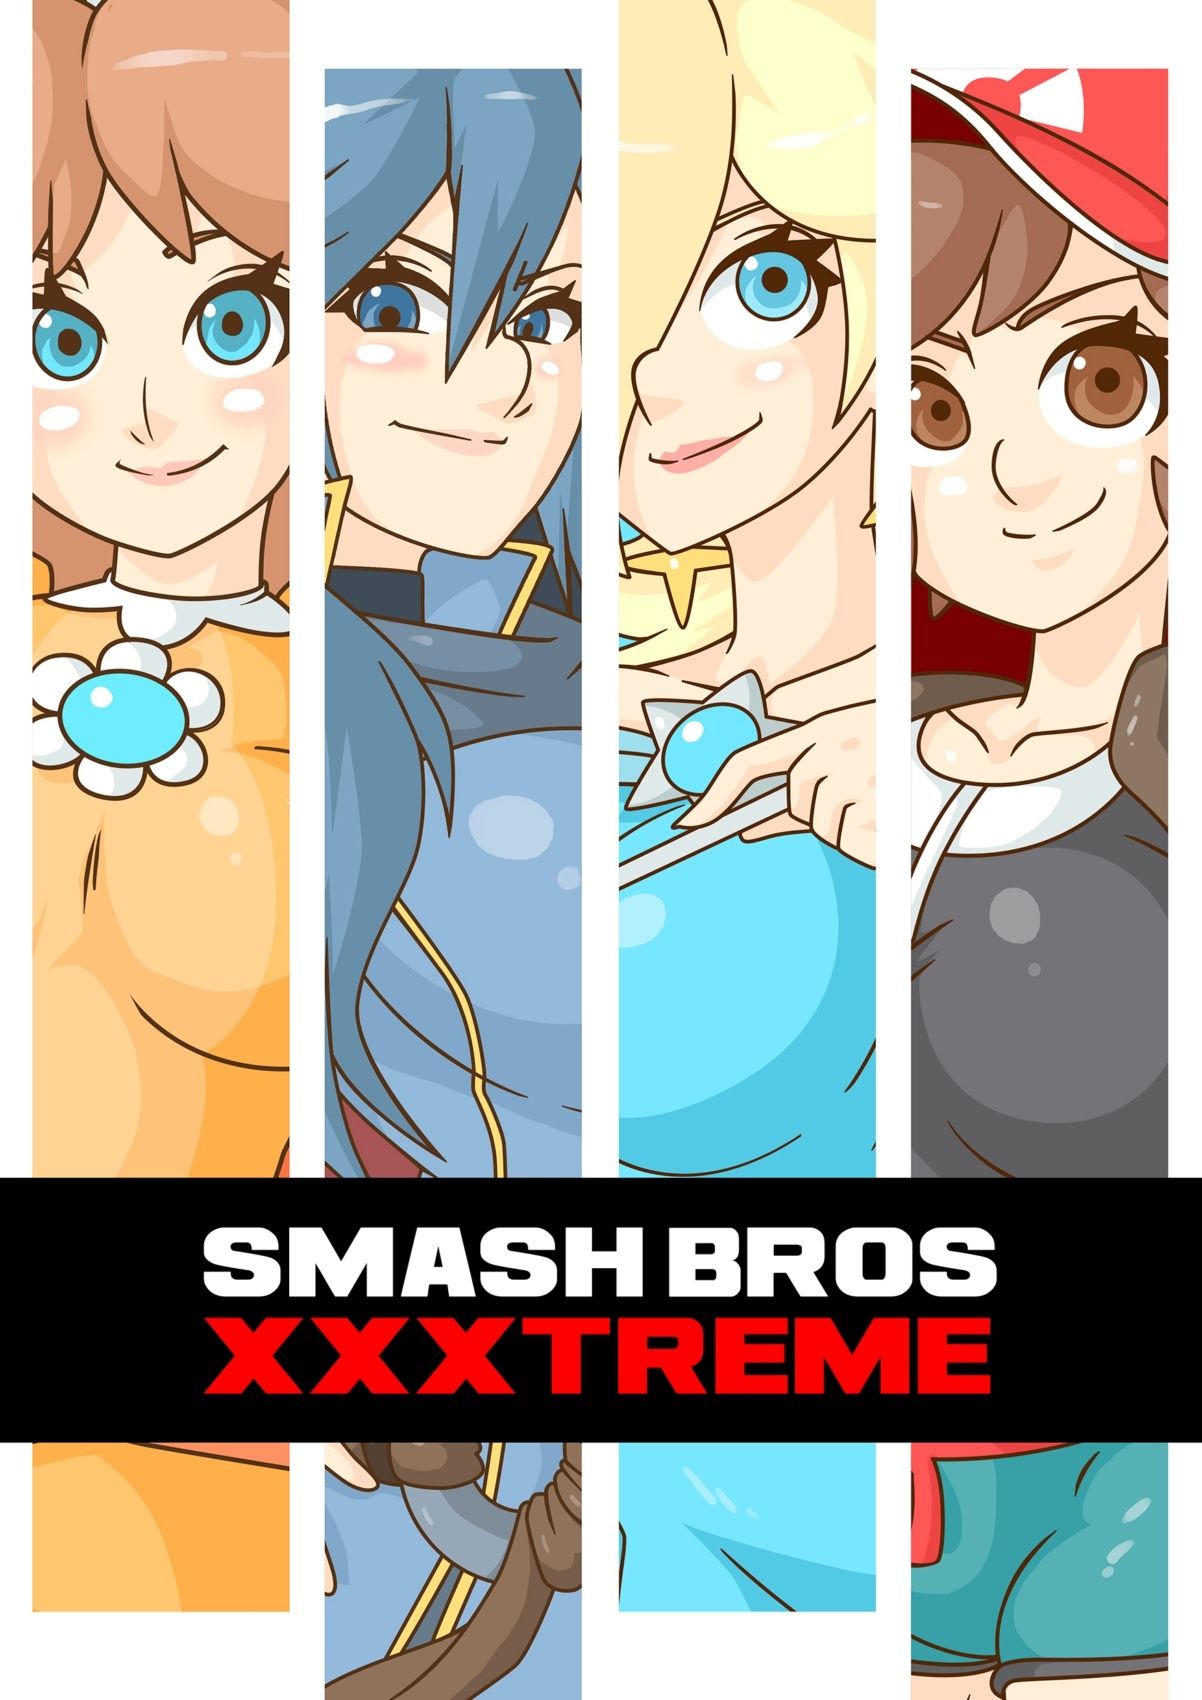 Smash Bros XXXtreme by Witchking00 page 1